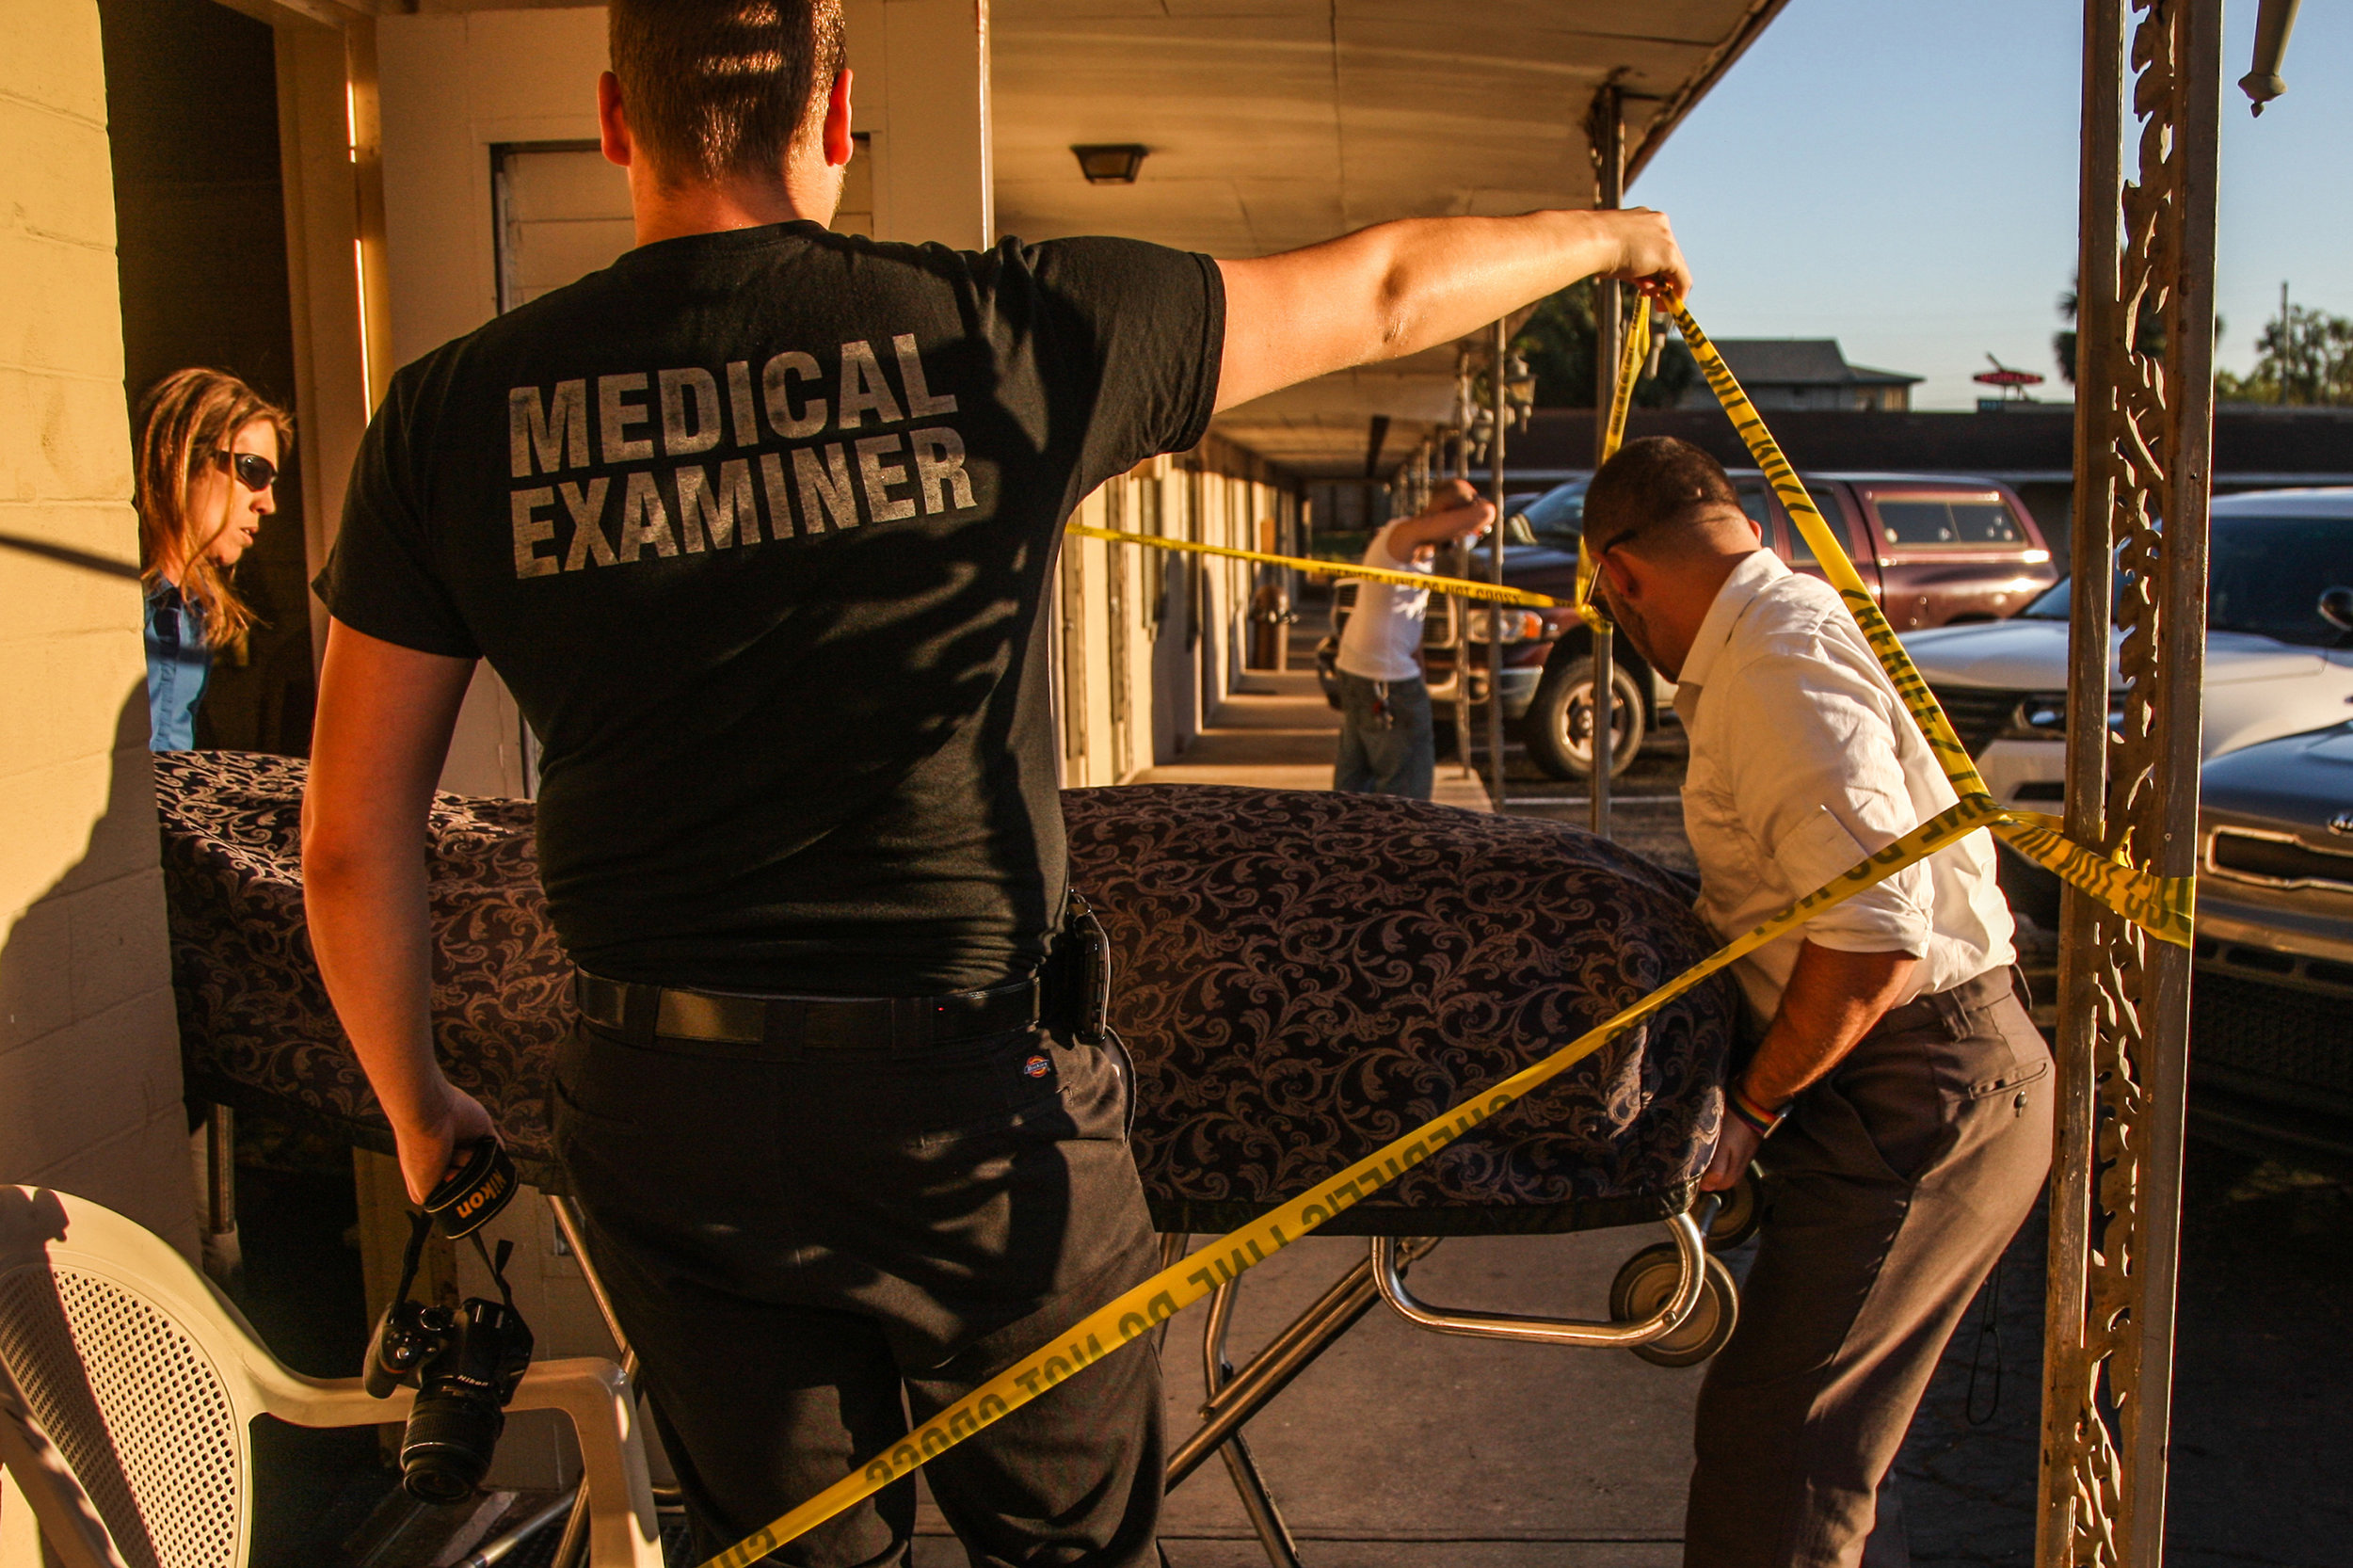  Medical examiners remove Paul Gagne Jr.’s body from a Boulevard Motel room. Based on drug paraphernalia at the scene, Volusia County Sheriff’s Office investigators believe Gagne overdosed on drugs. Charles Chancery, shown standing in the background,